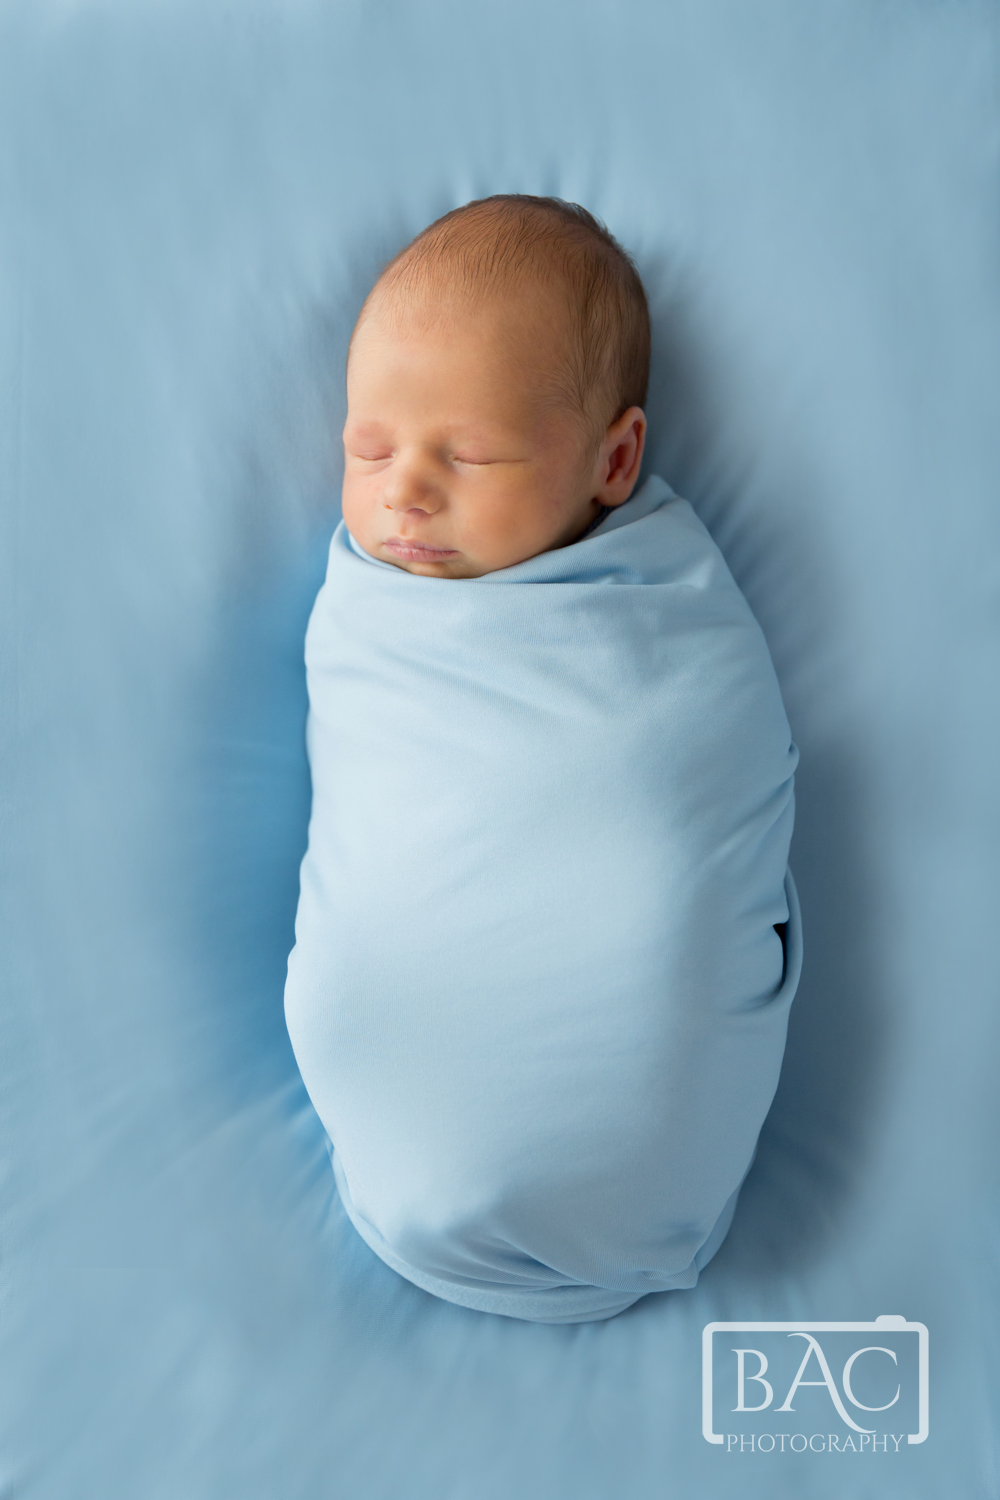 Newborn baby boy in blue all wrapped up